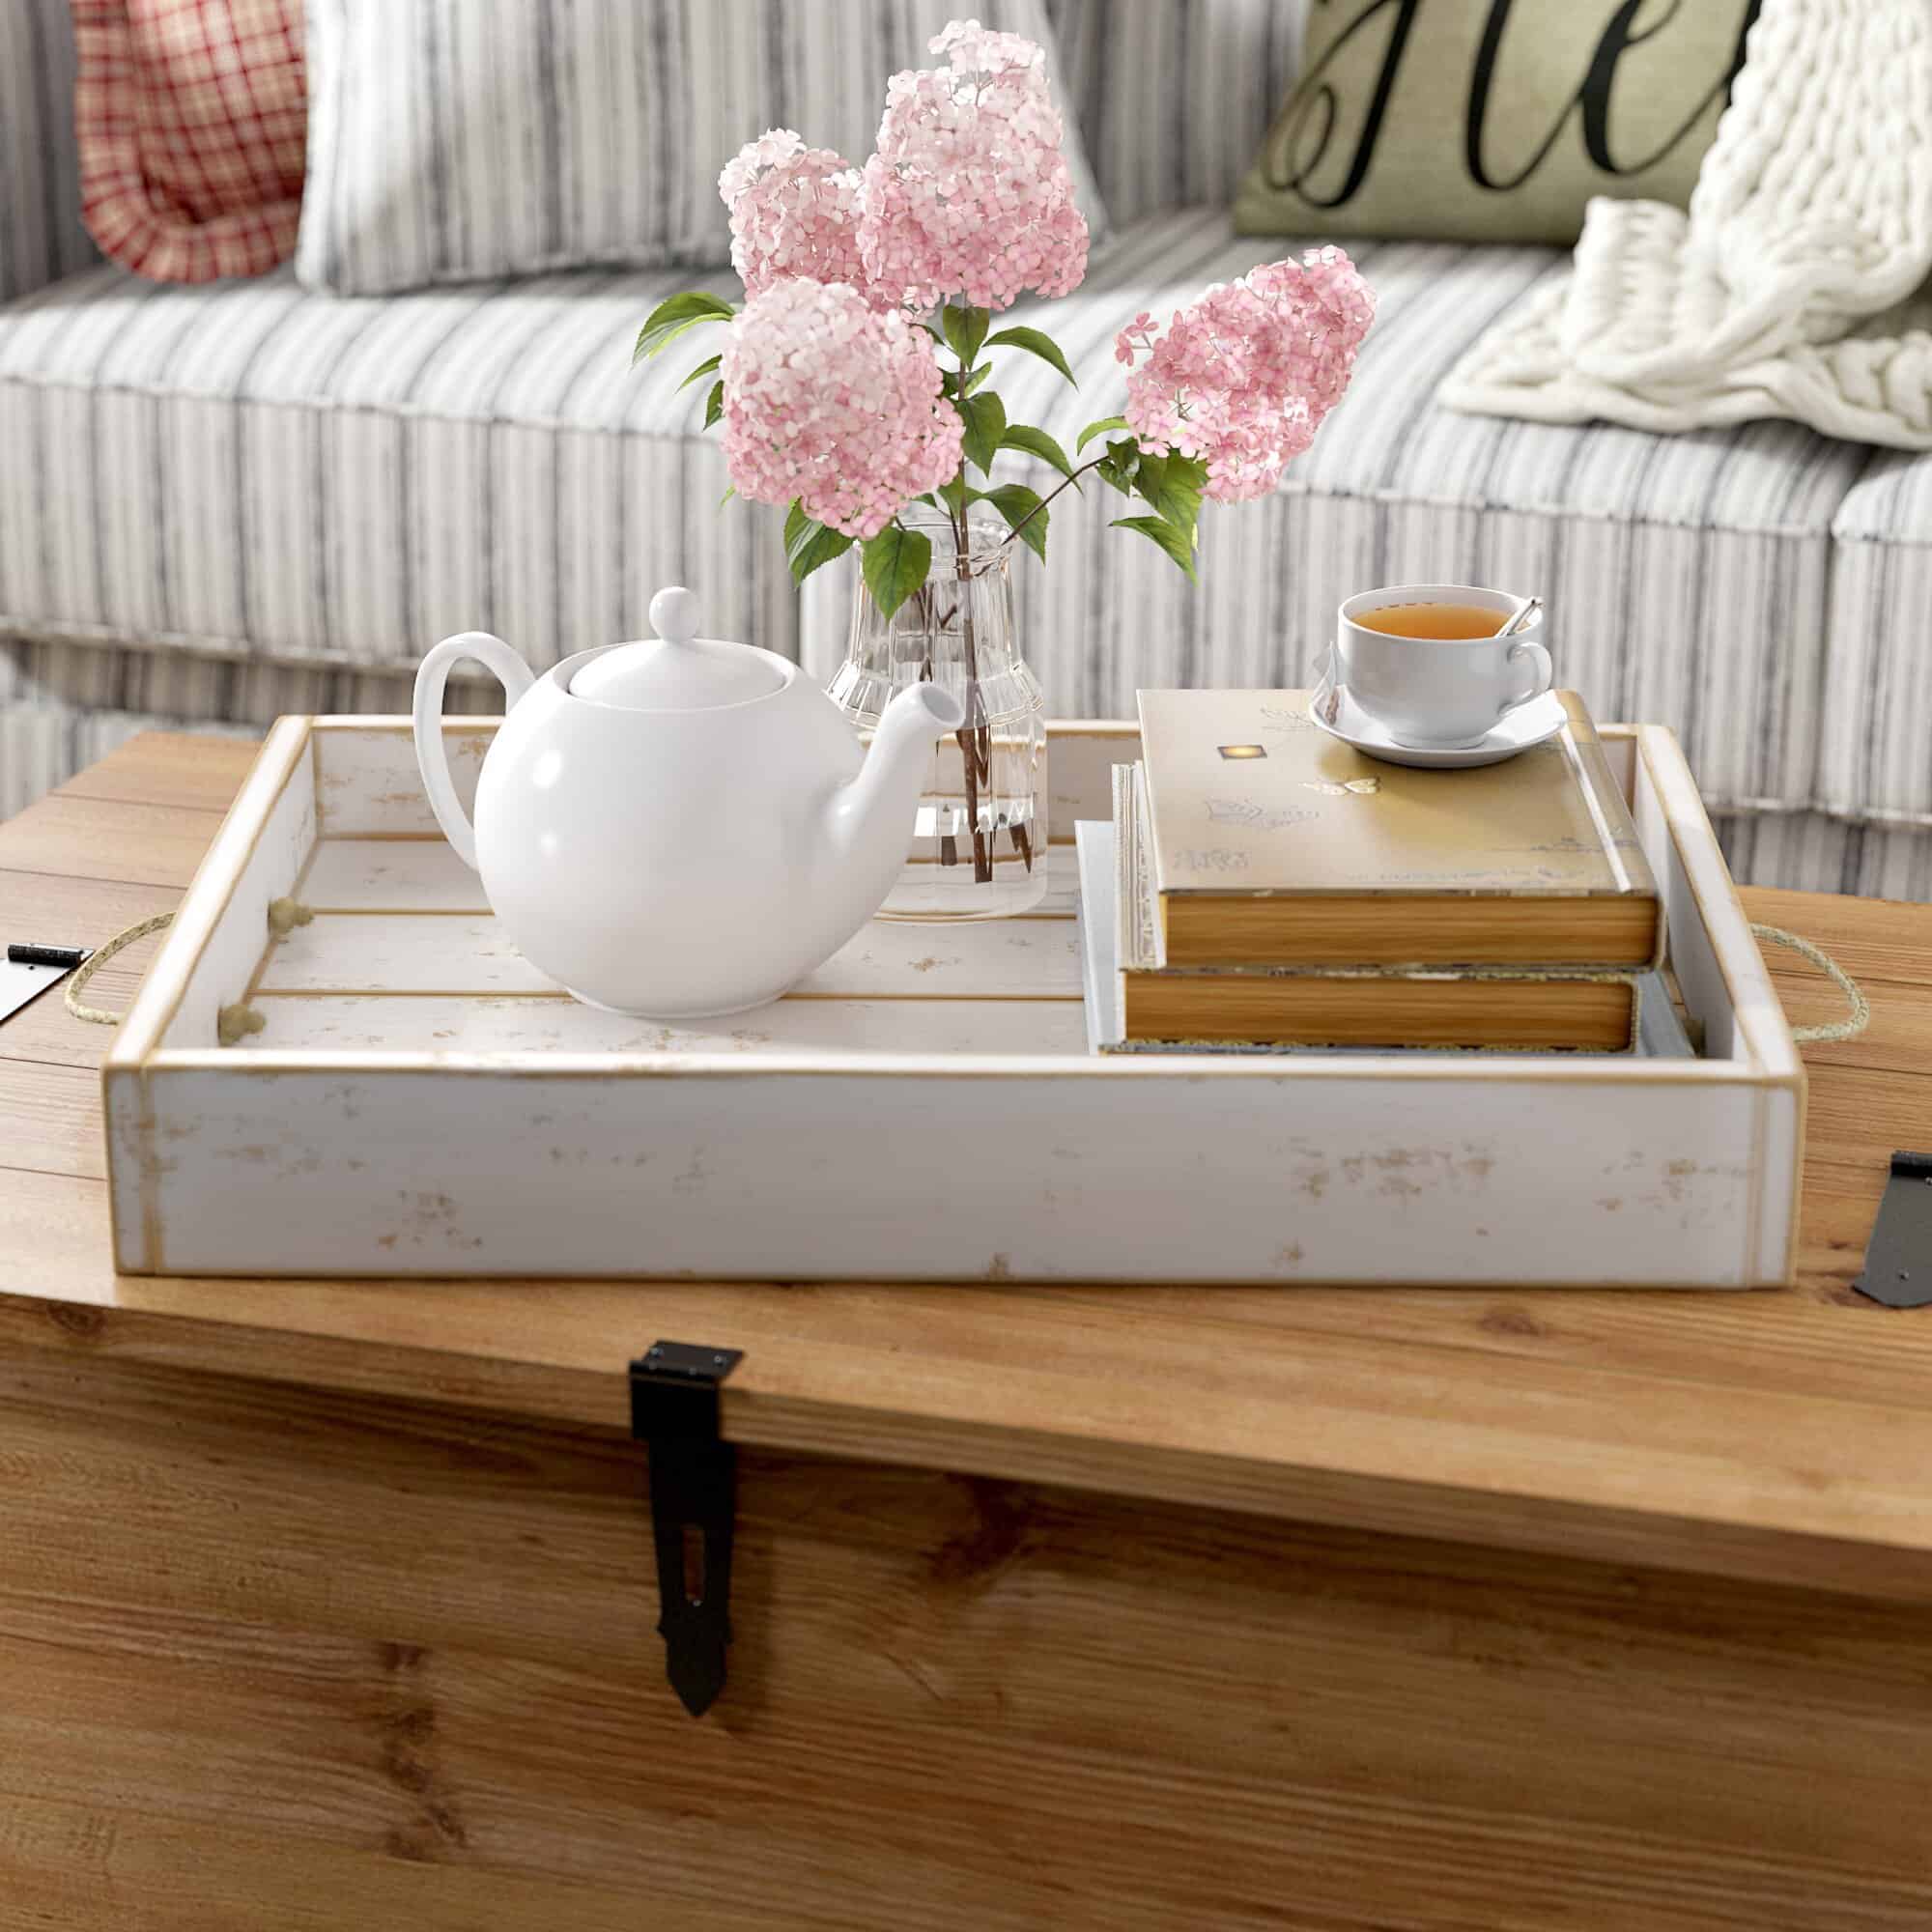 A Wooden Serving Tray Will Steal Farmhouse Lovers' Hearts